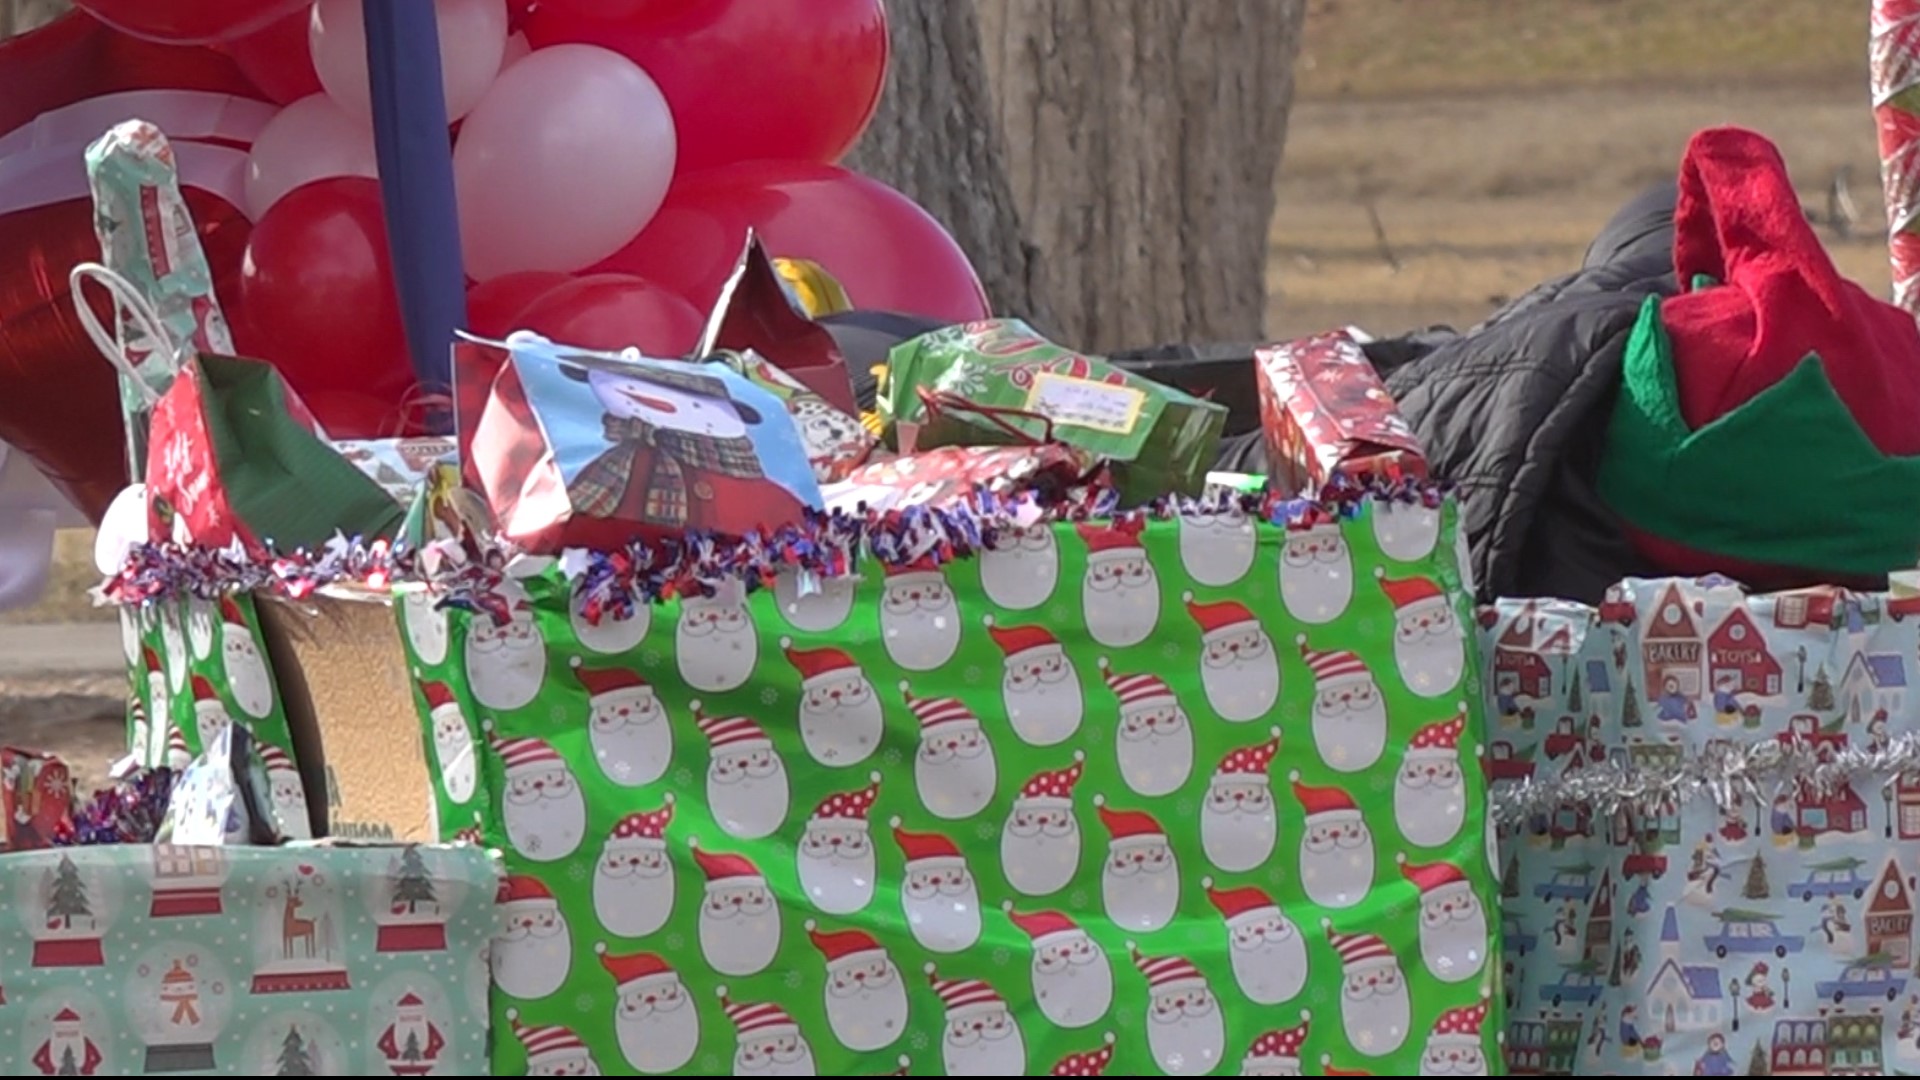 Over 1000 free gifts were given away to people who showed up to San Jacinto park.